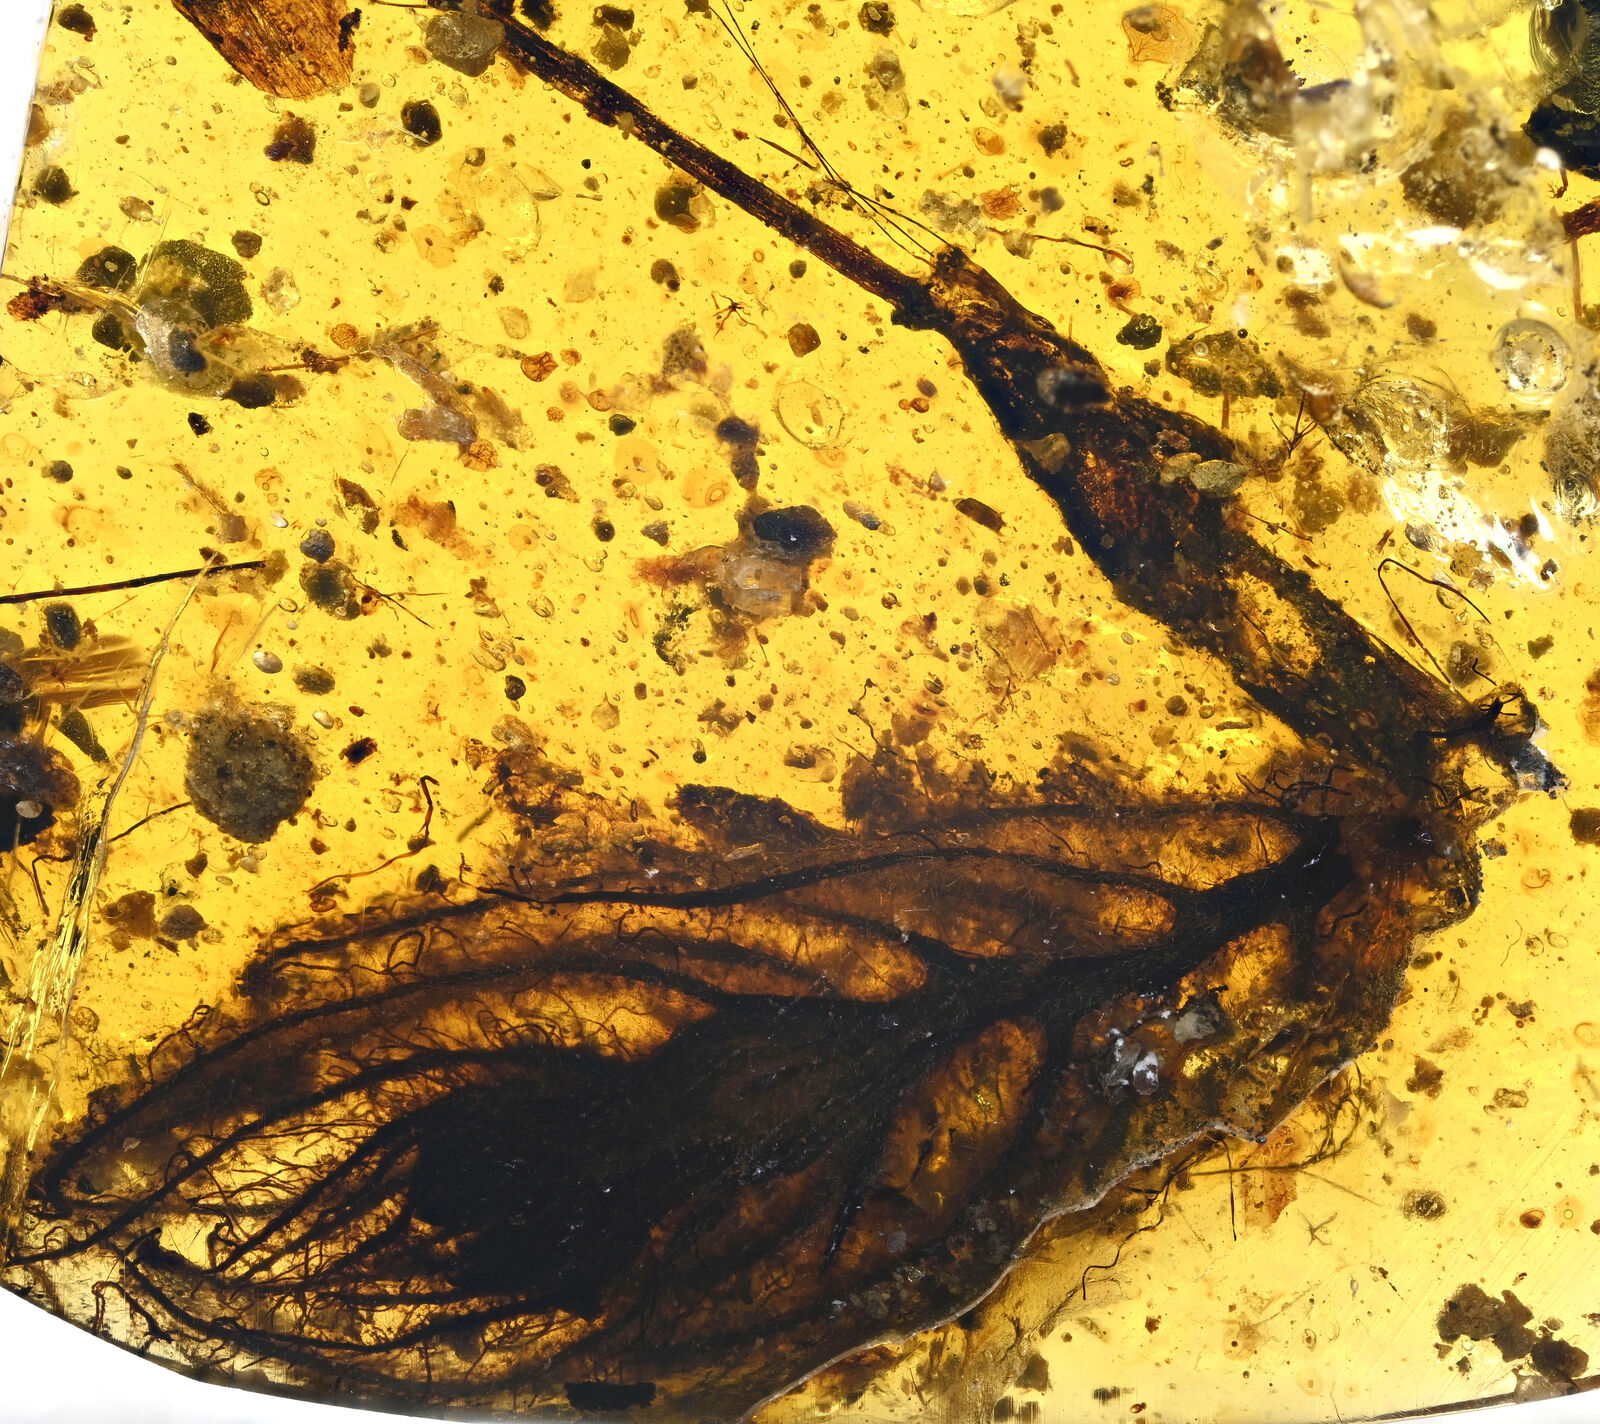 Large Blooming Flower, Fossil inclusion in Burmese Amber